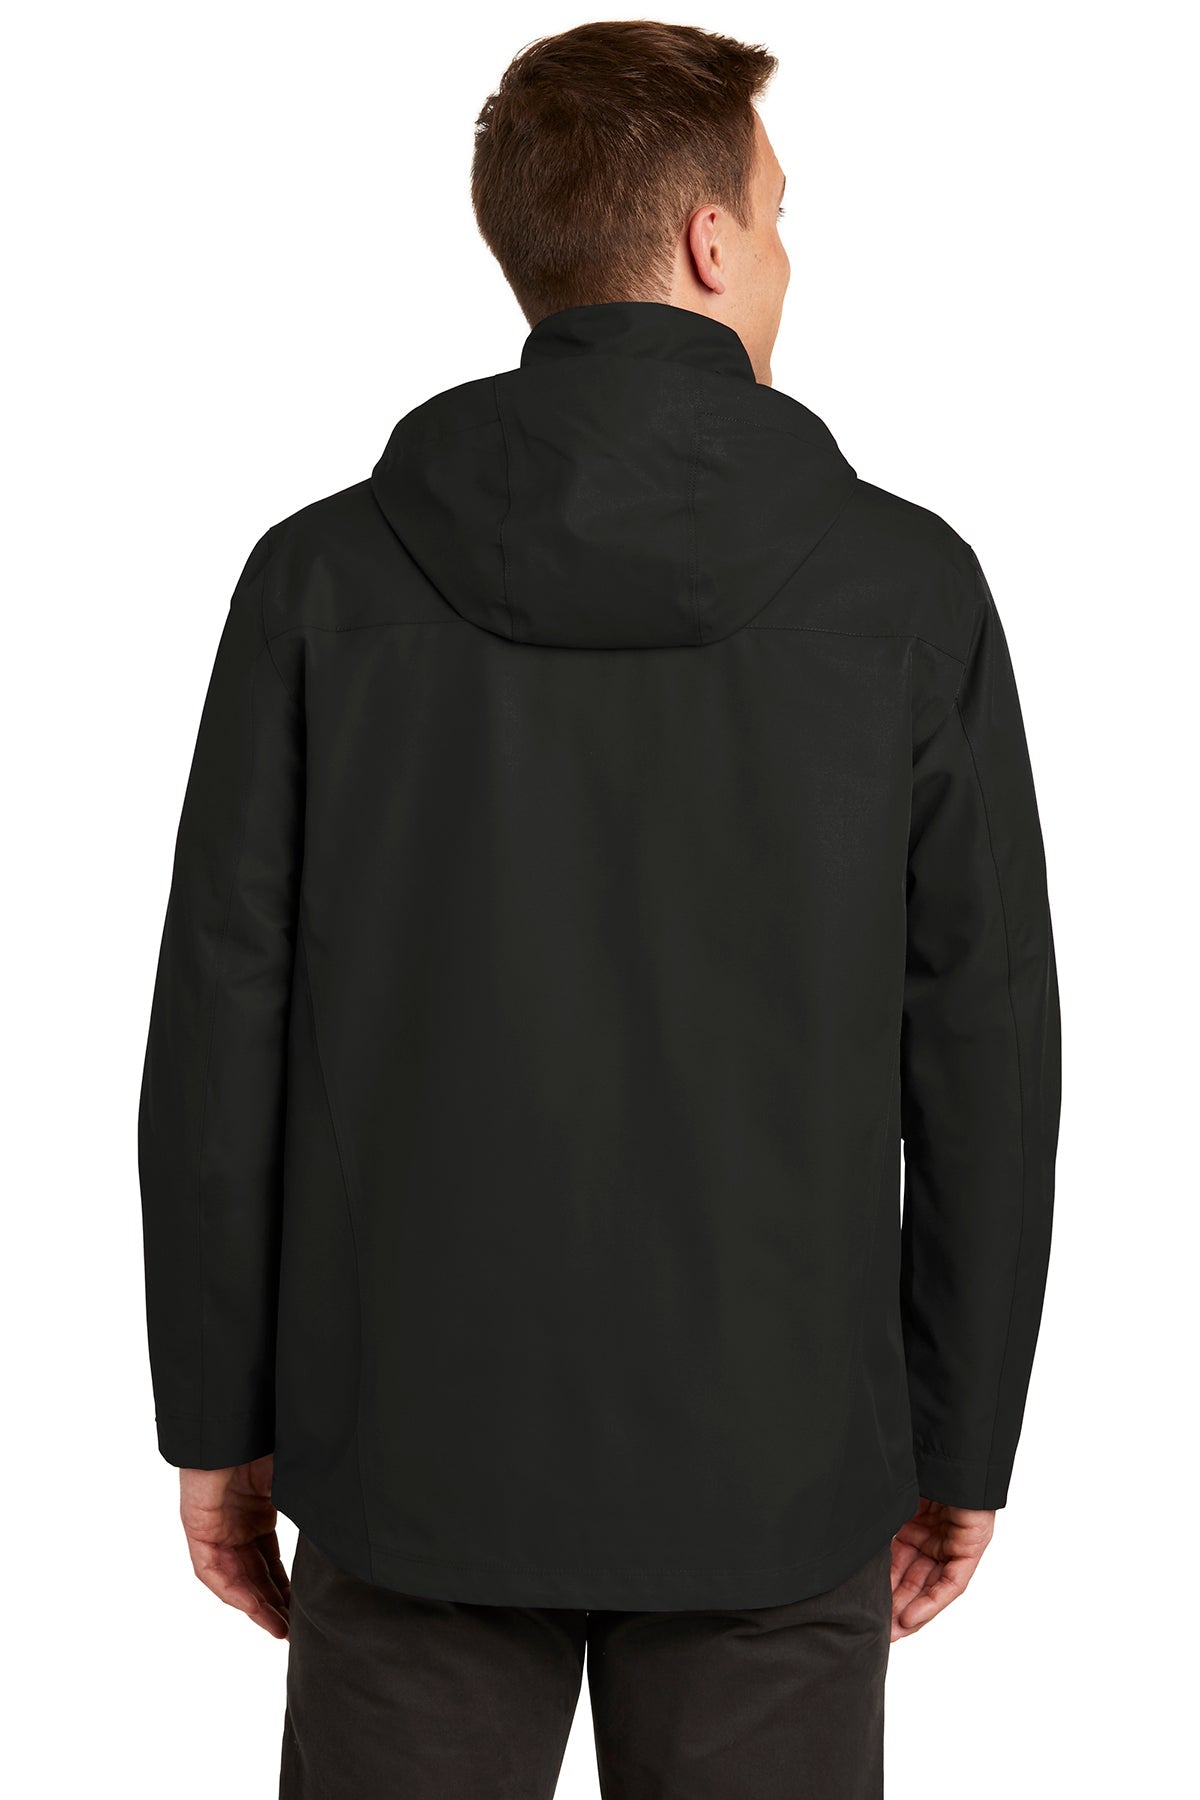 Port Authority Collective Outer Shell Branded Jackets, Deep Black